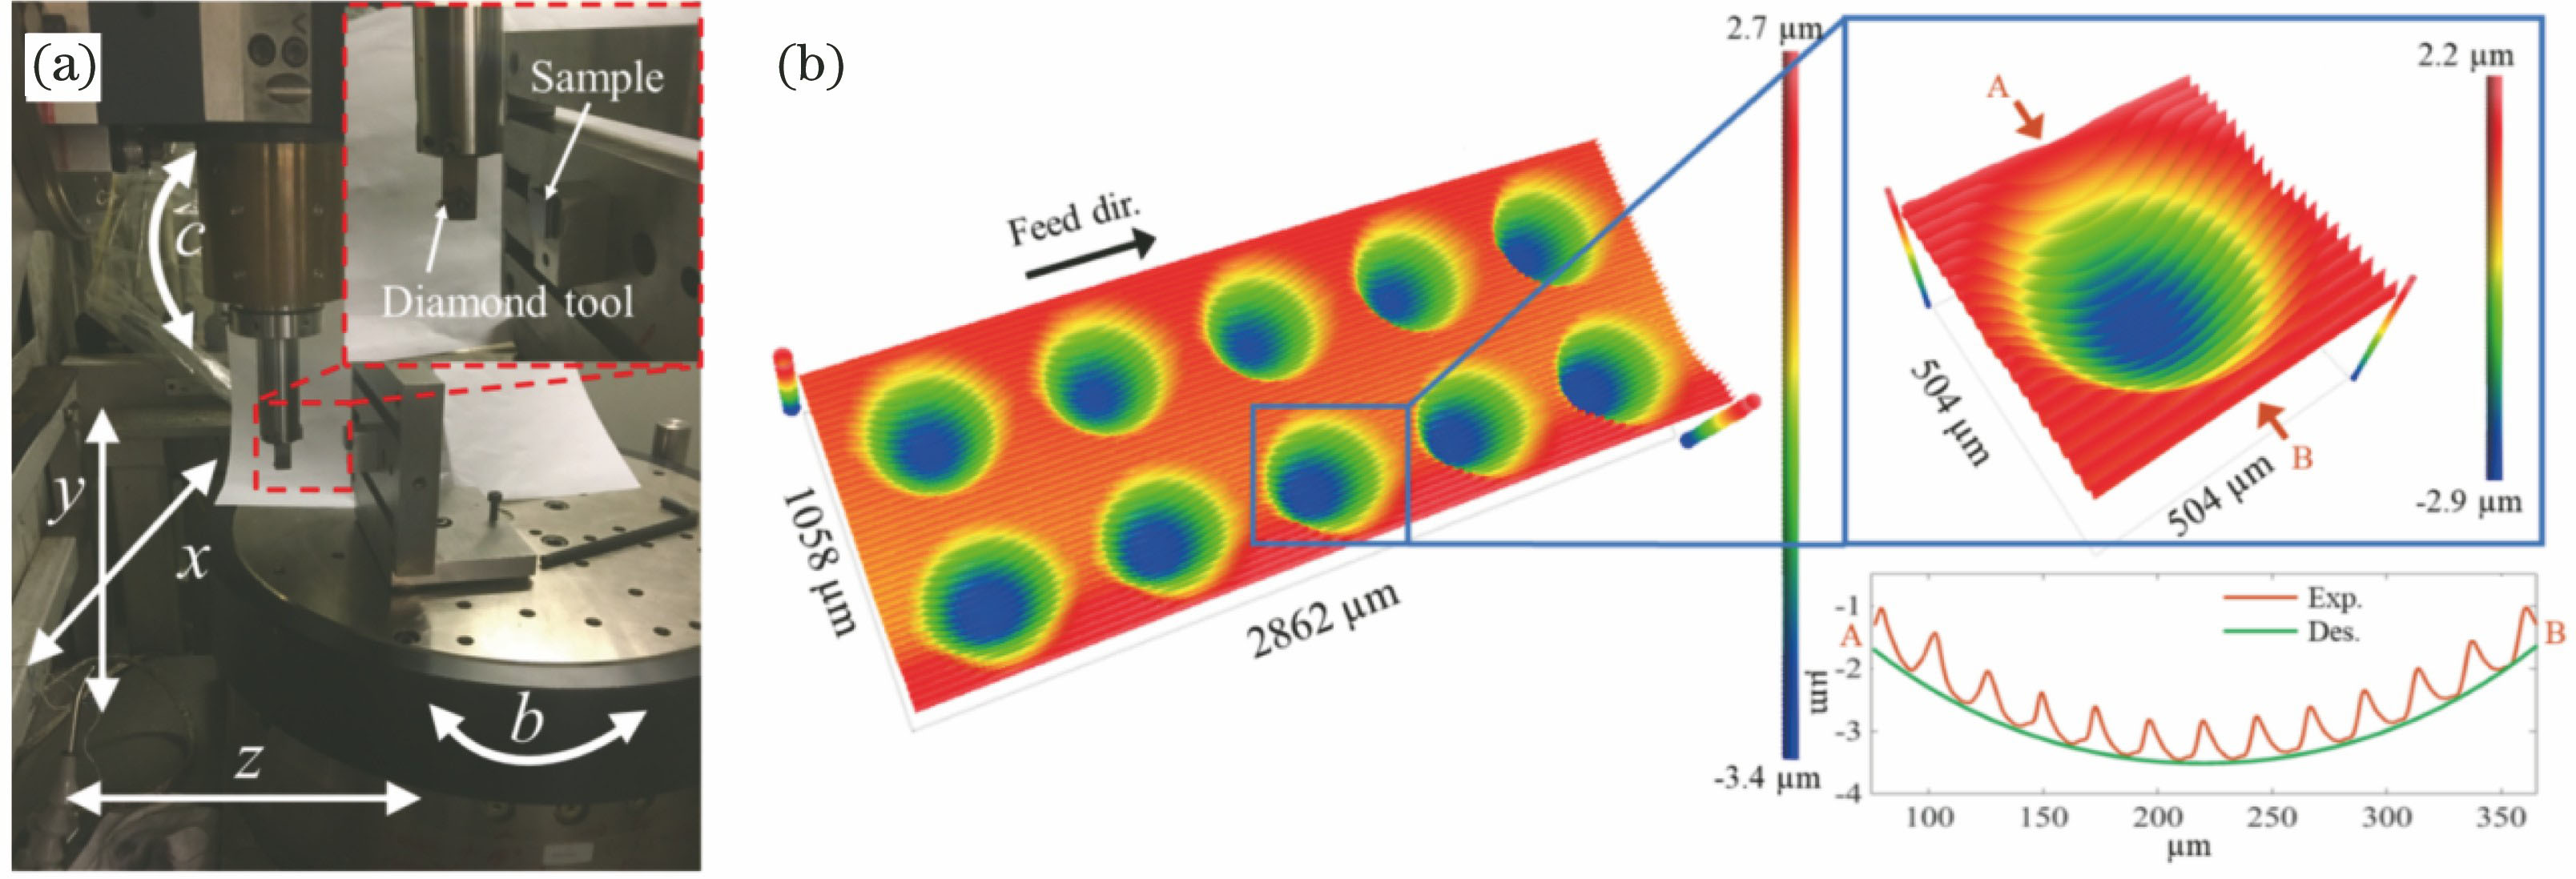 Fabrication of IR microlens array on Si substrate by ultra-precision milling method[40]. (a) Micro-milling system with diamond tool; (b) surface morphology of the machined microlens array